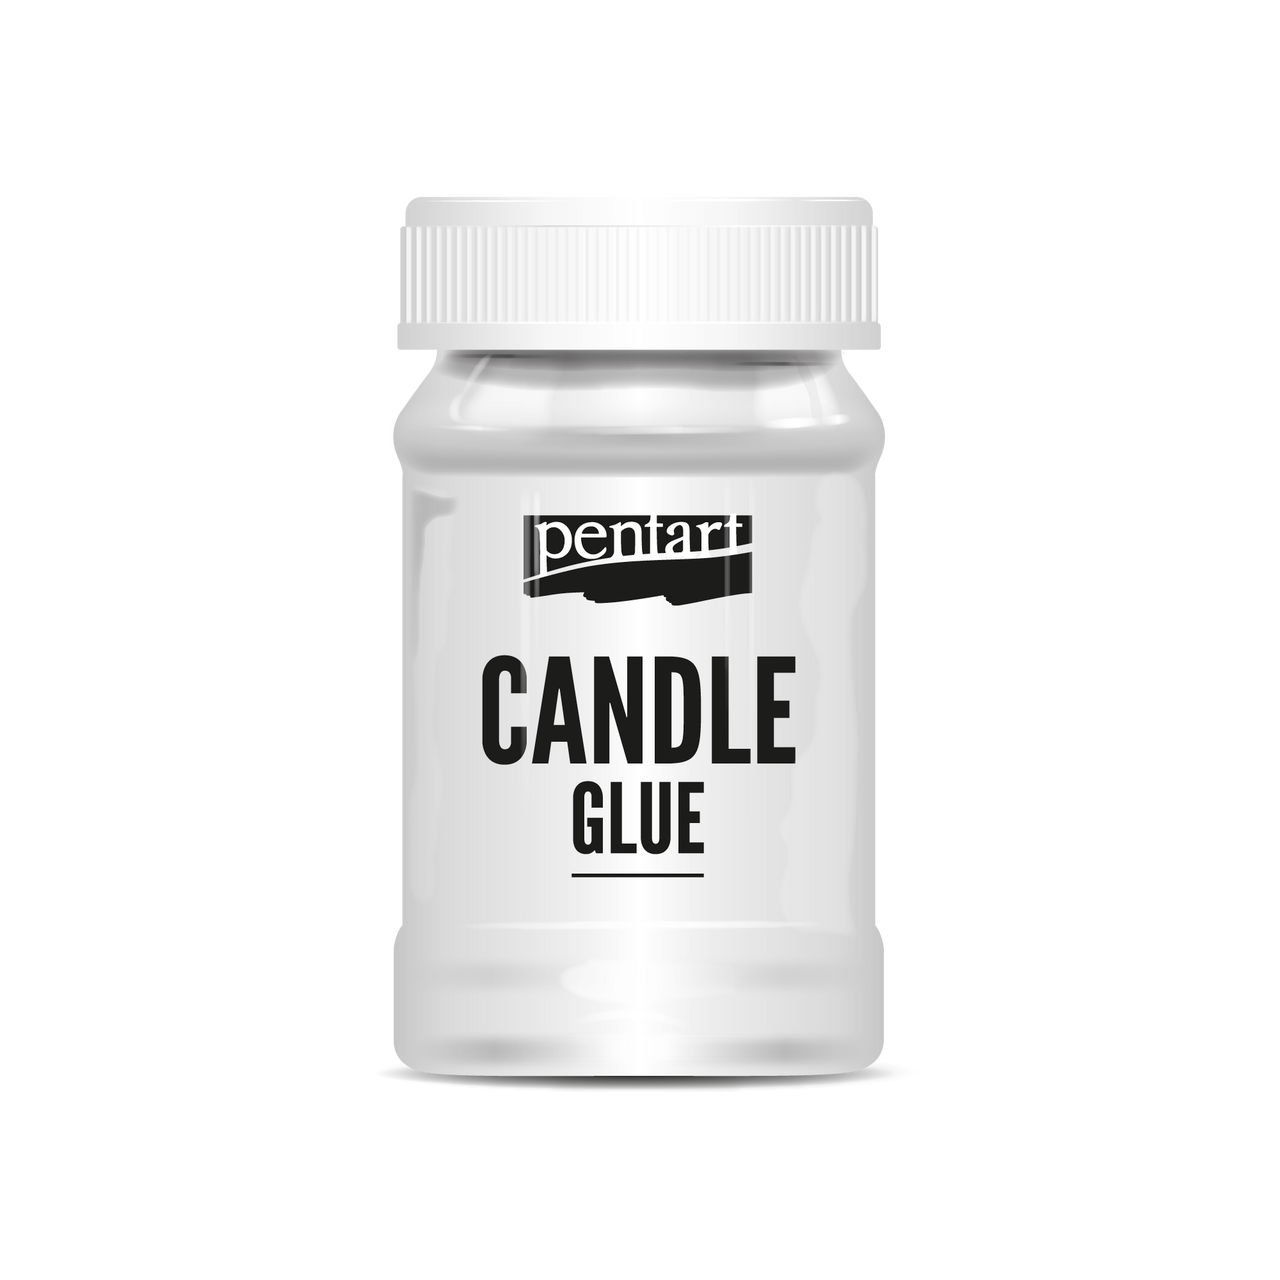 Pentart candle glue - Glue contains a flame retardant & can be burned safely.